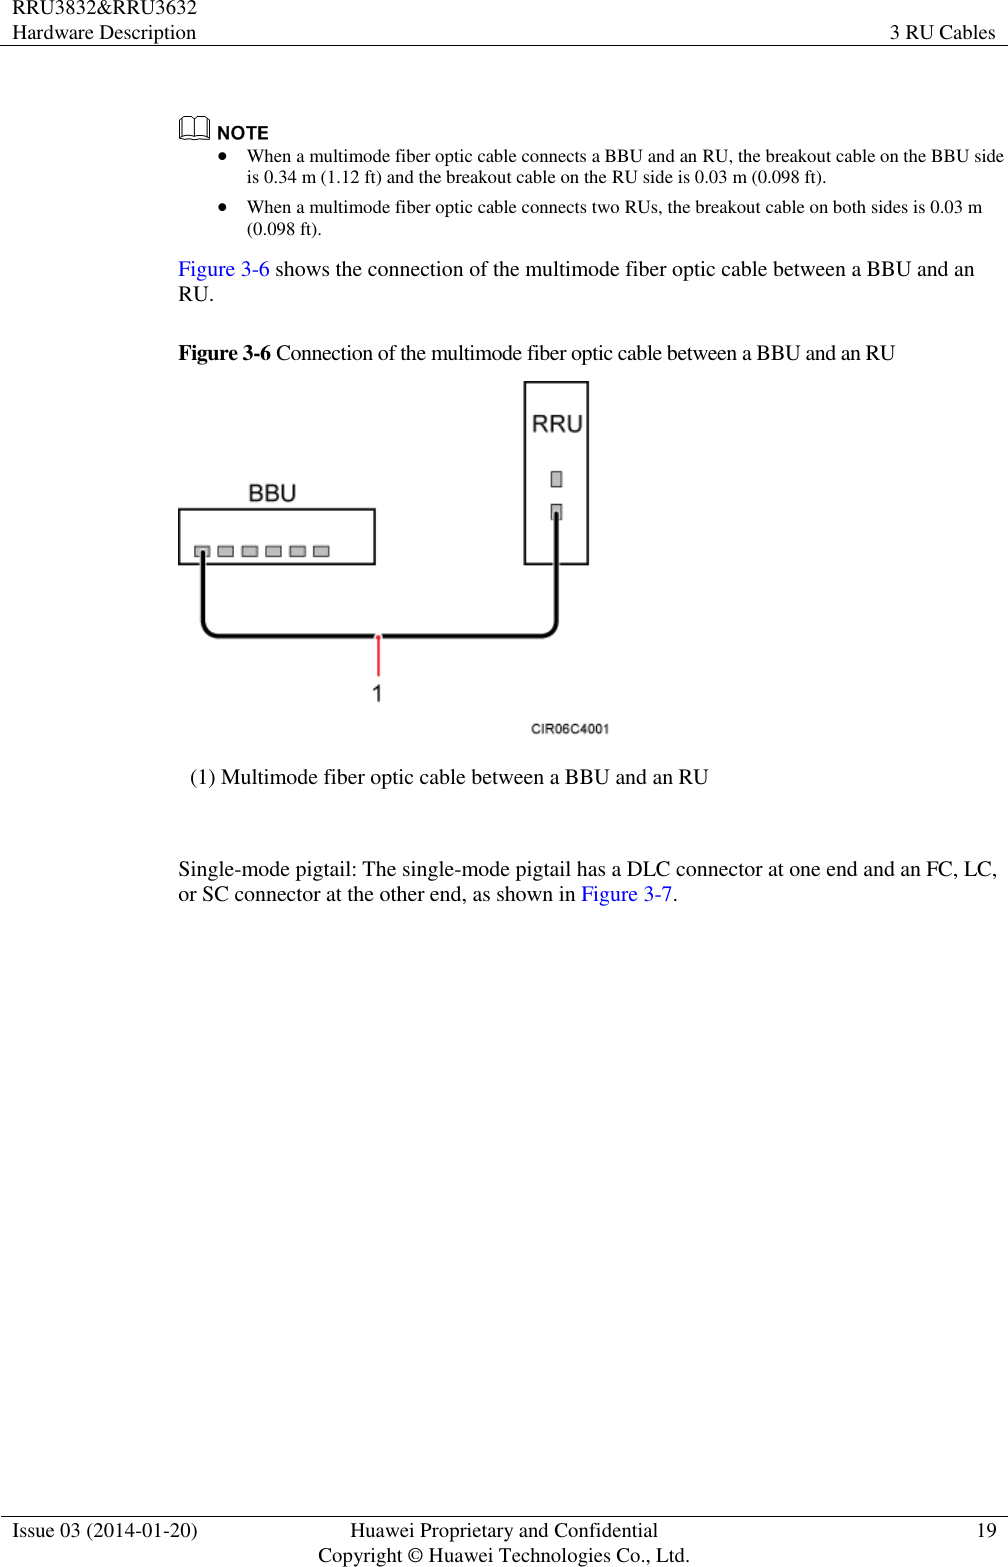 RRU3832&amp;RRU3632 Hardware Description 3 RU Cables  Issue 03 (2014-01-20) Huawei Proprietary and Confidential                                     Copyright © Huawei Technologies Co., Ltd. 19     When a multimode fiber optic cable connects a BBU and an RU, the breakout cable on the BBU side is 0.34 m (1.12 ft) and the breakout cable on the RU side is 0.03 m (0.098 ft).  When a multimode fiber optic cable connects two RUs, the breakout cable on both sides is 0.03 m (0.098 ft). Figure 3-6 shows the connection of the multimode fiber optic cable between a BBU and an RU. Figure 3-6 Connection of the multimode fiber optic cable between a BBU and an RU  (1) Multimode fiber optic cable between a BBU and an RU  Single-mode pigtail: The single-mode pigtail has a DLC connector at one end and an FC, LC, or SC connector at the other end, as shown in Figure 3-7. 